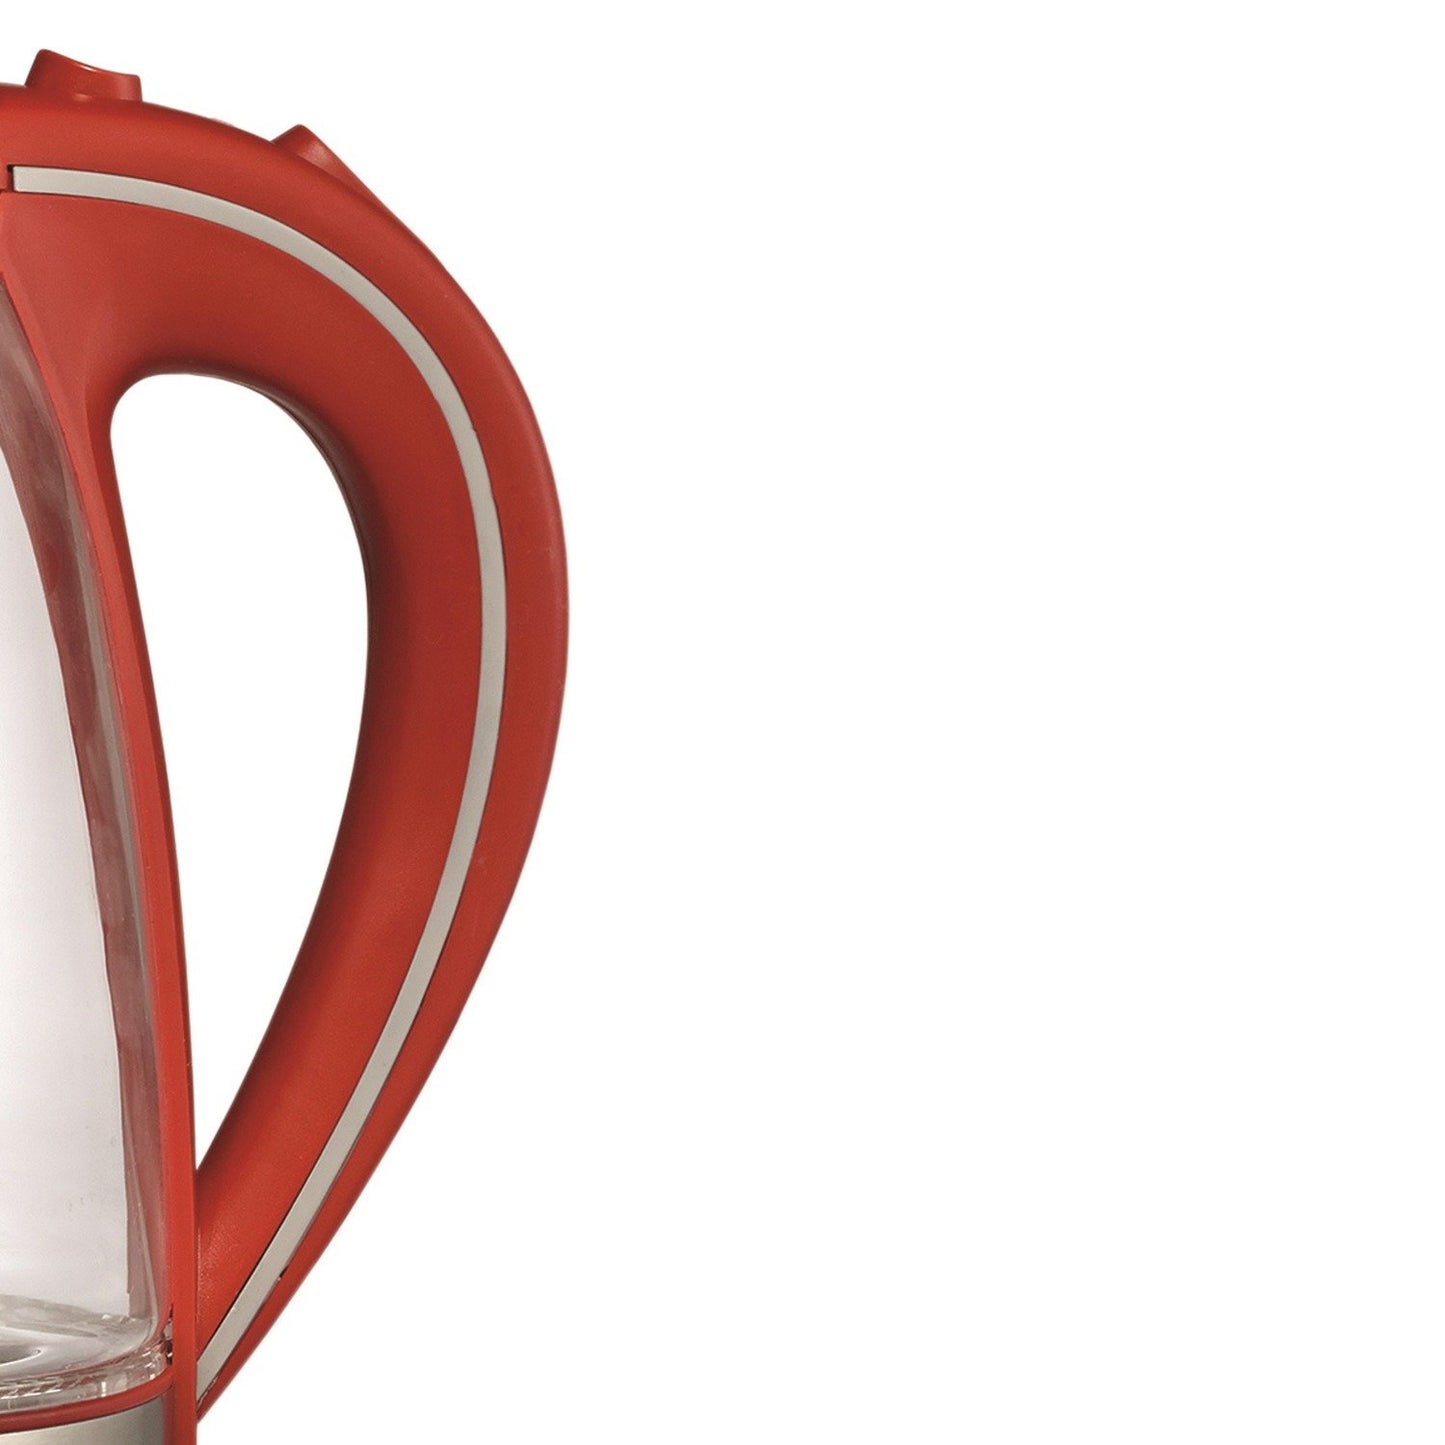 Brentwood Appl. KT-1900R 1.7L Cordless Tempered-Glass Electric Kettle (Red)